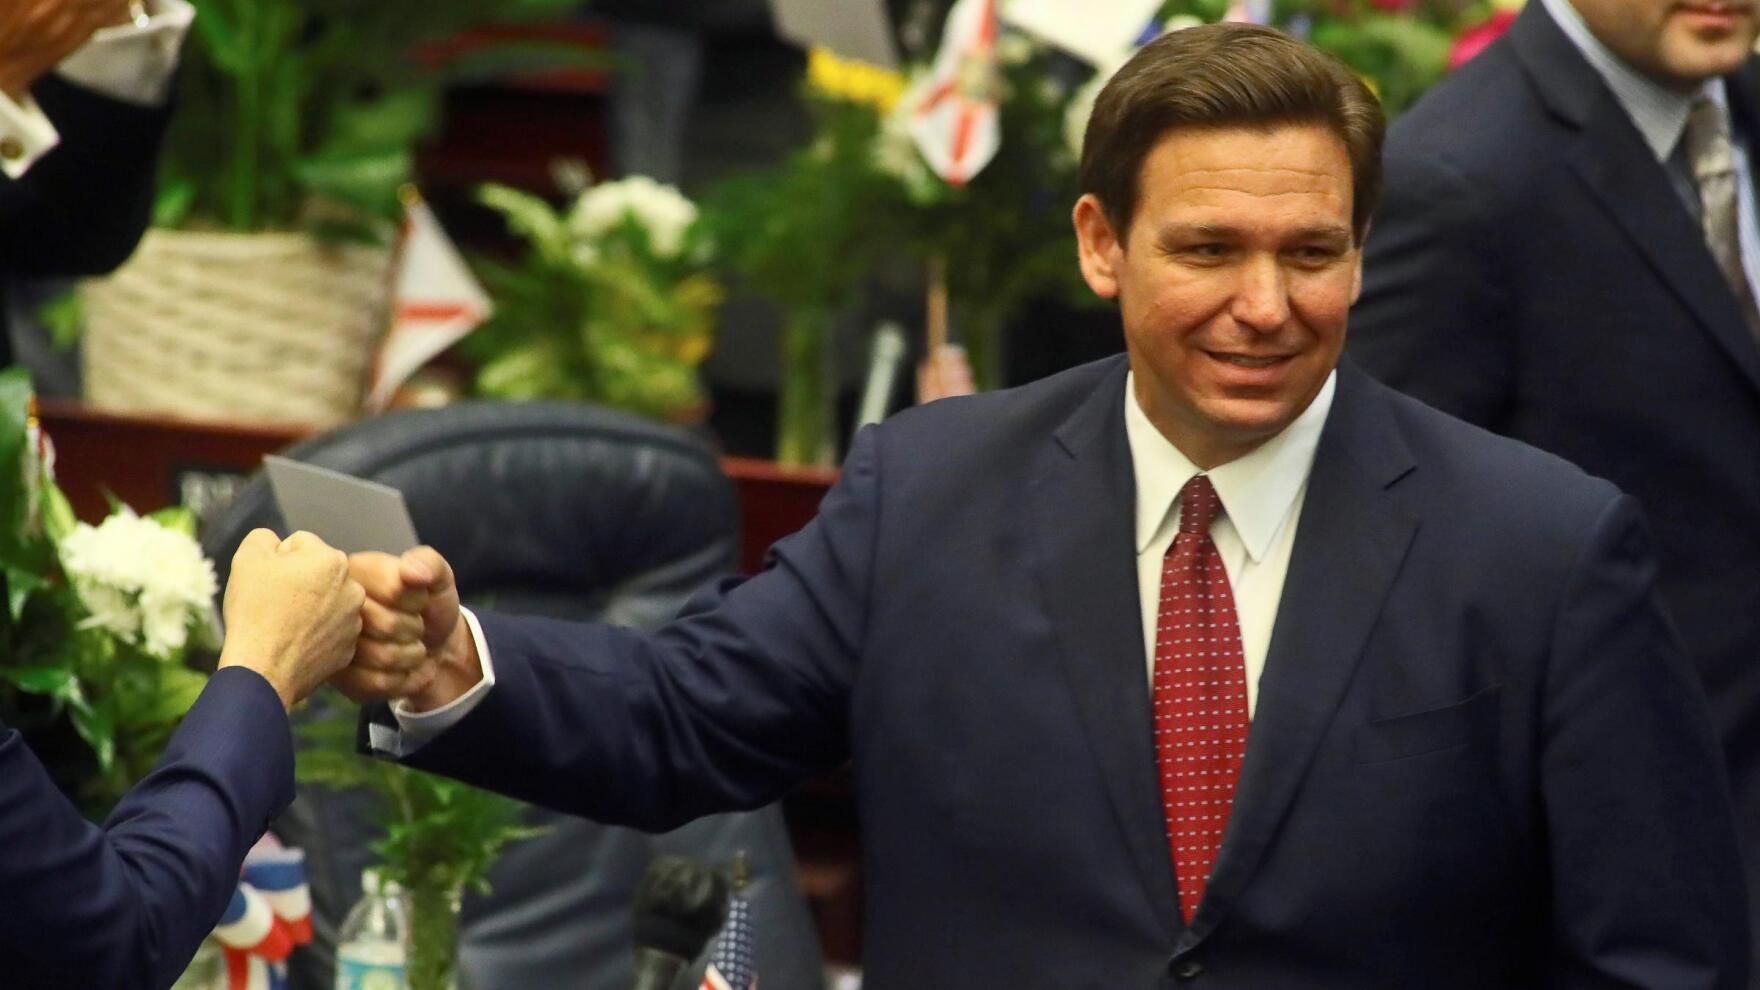 Featured image for “OPINION | Ron DeSantis doesn’t get Duval. Does he care?”